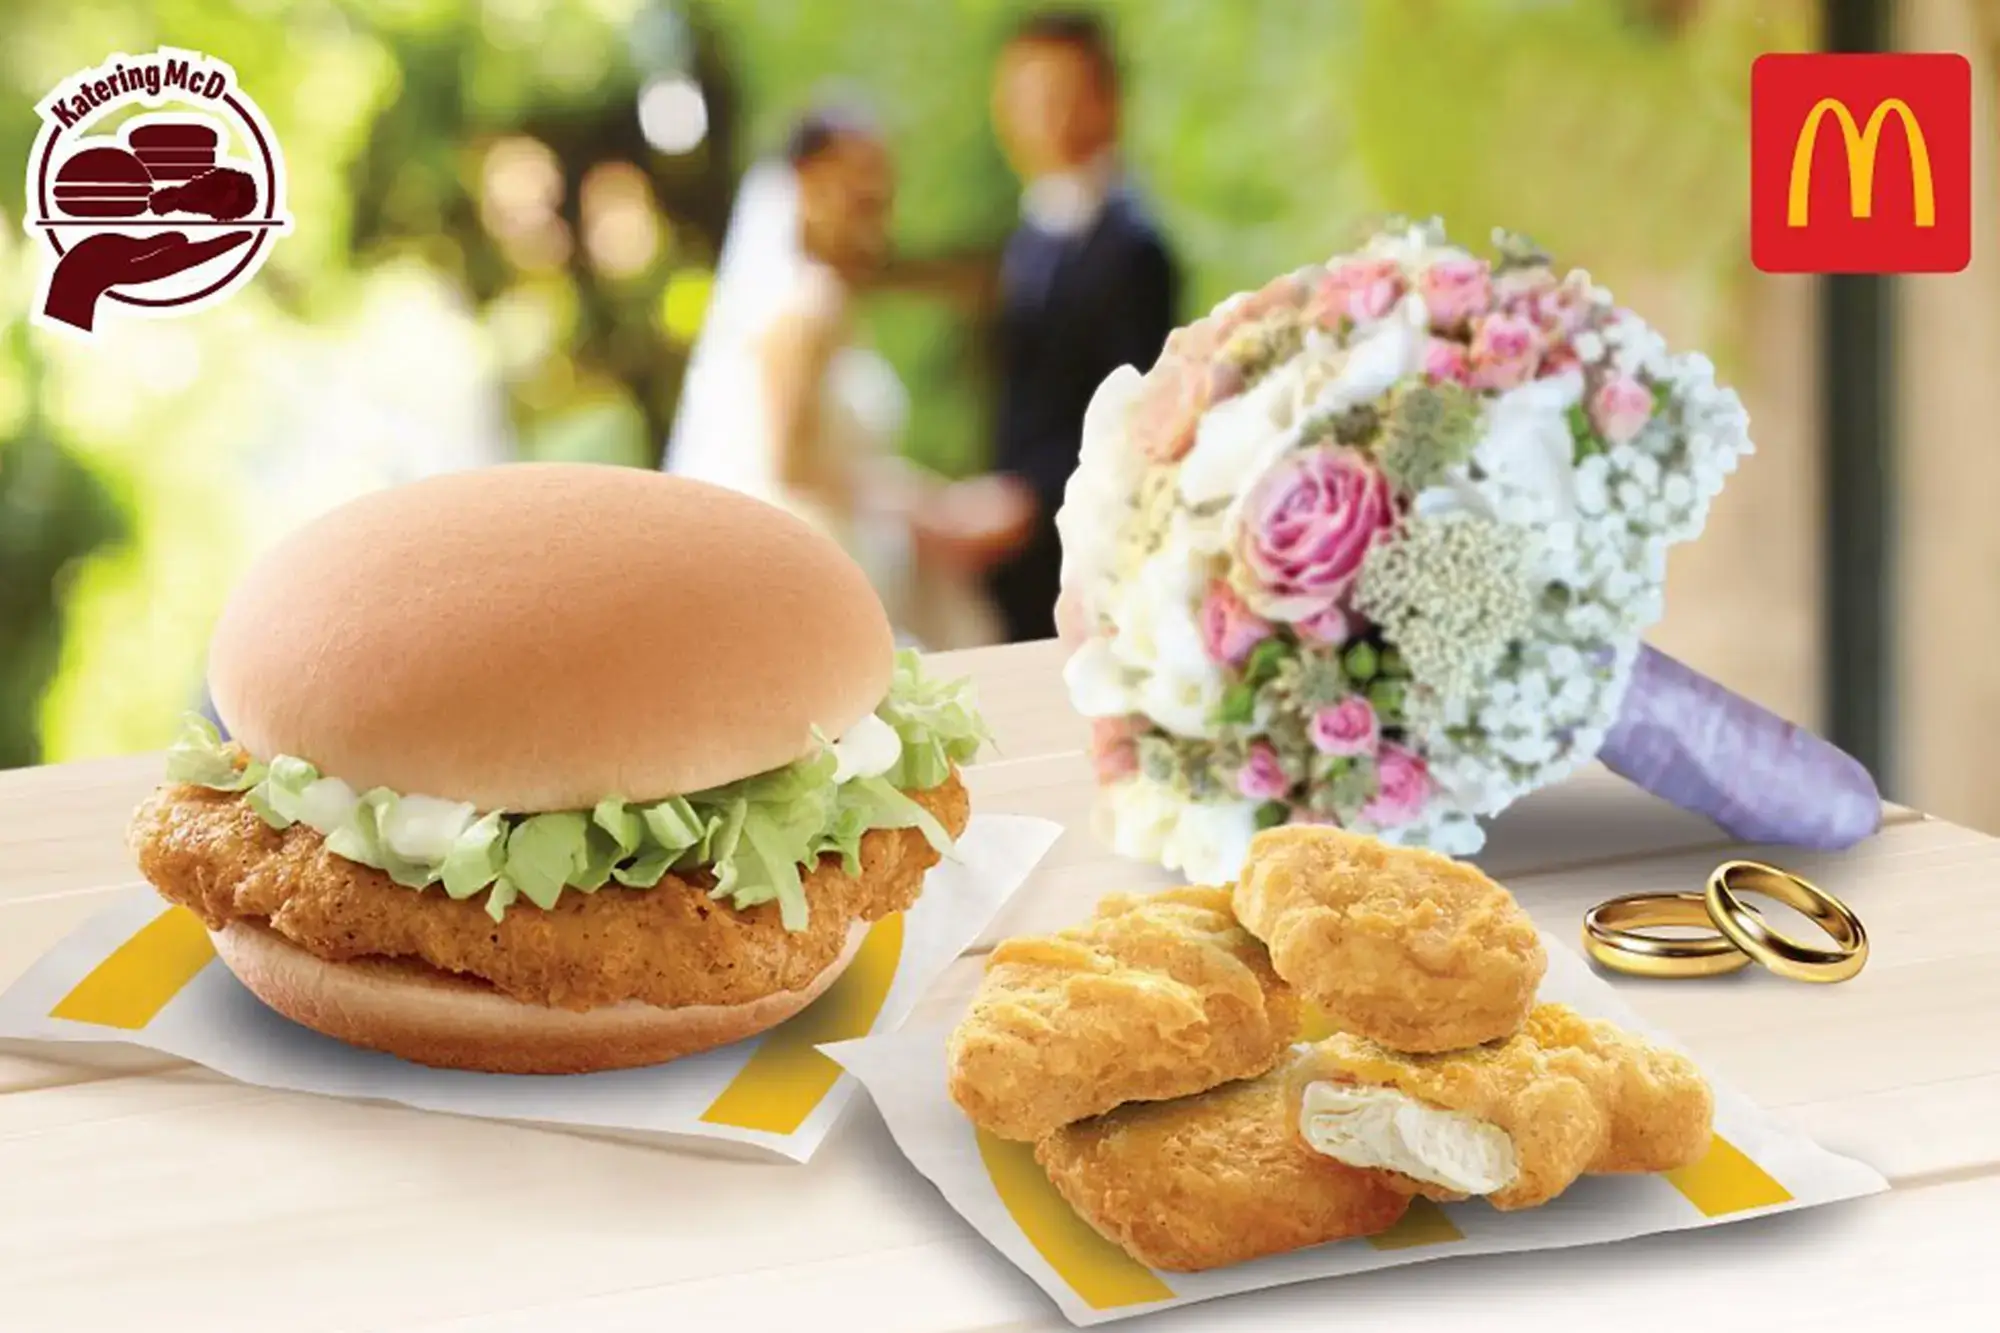 McDonald's just last month introduced a new wedding package for $200 for those who want the golden arches to cater their special day.